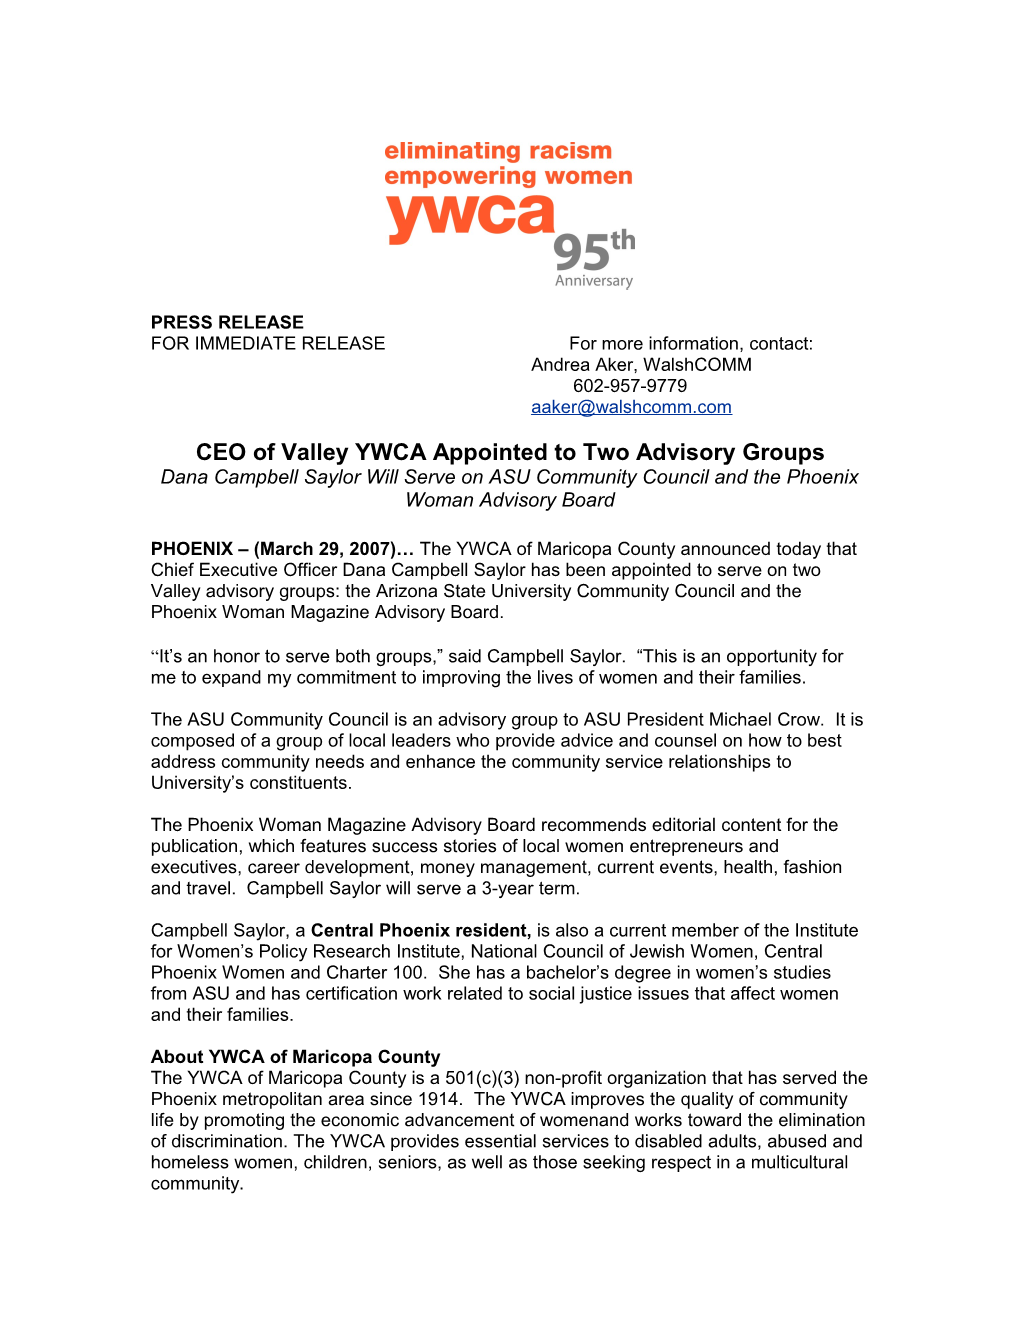 CEO of Valley YWCA Appointed to Two Advisory Groups